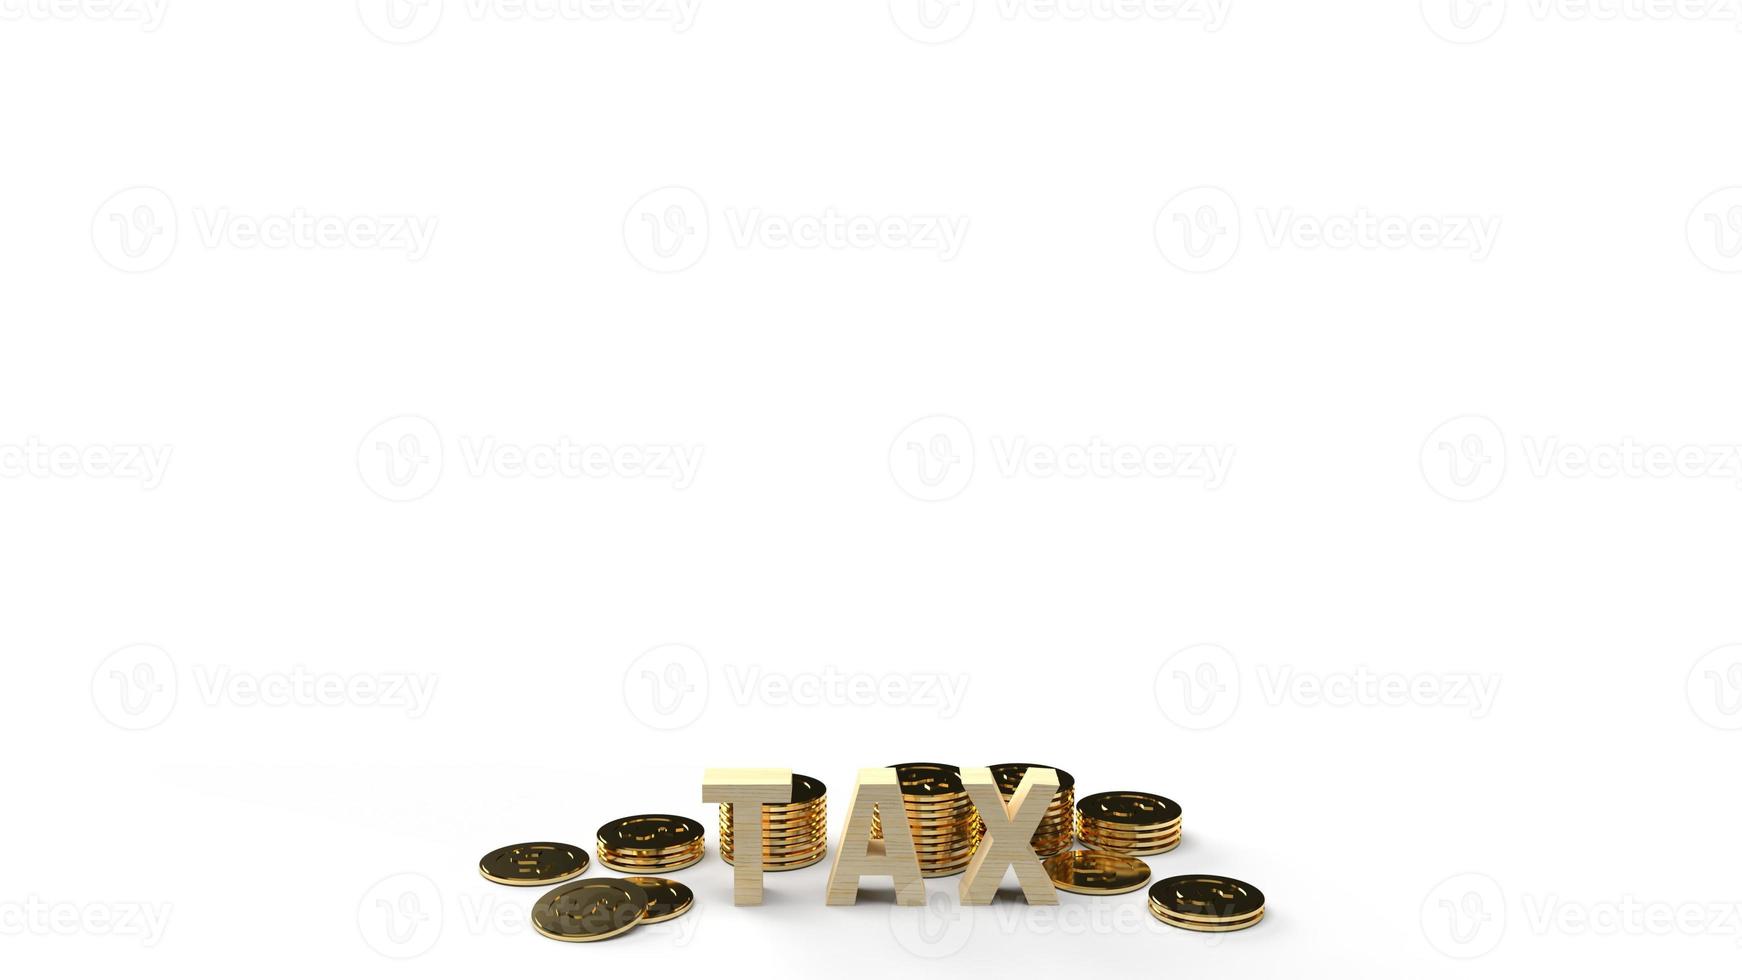 The wood tax and coin 3d rendering image for business content. photo